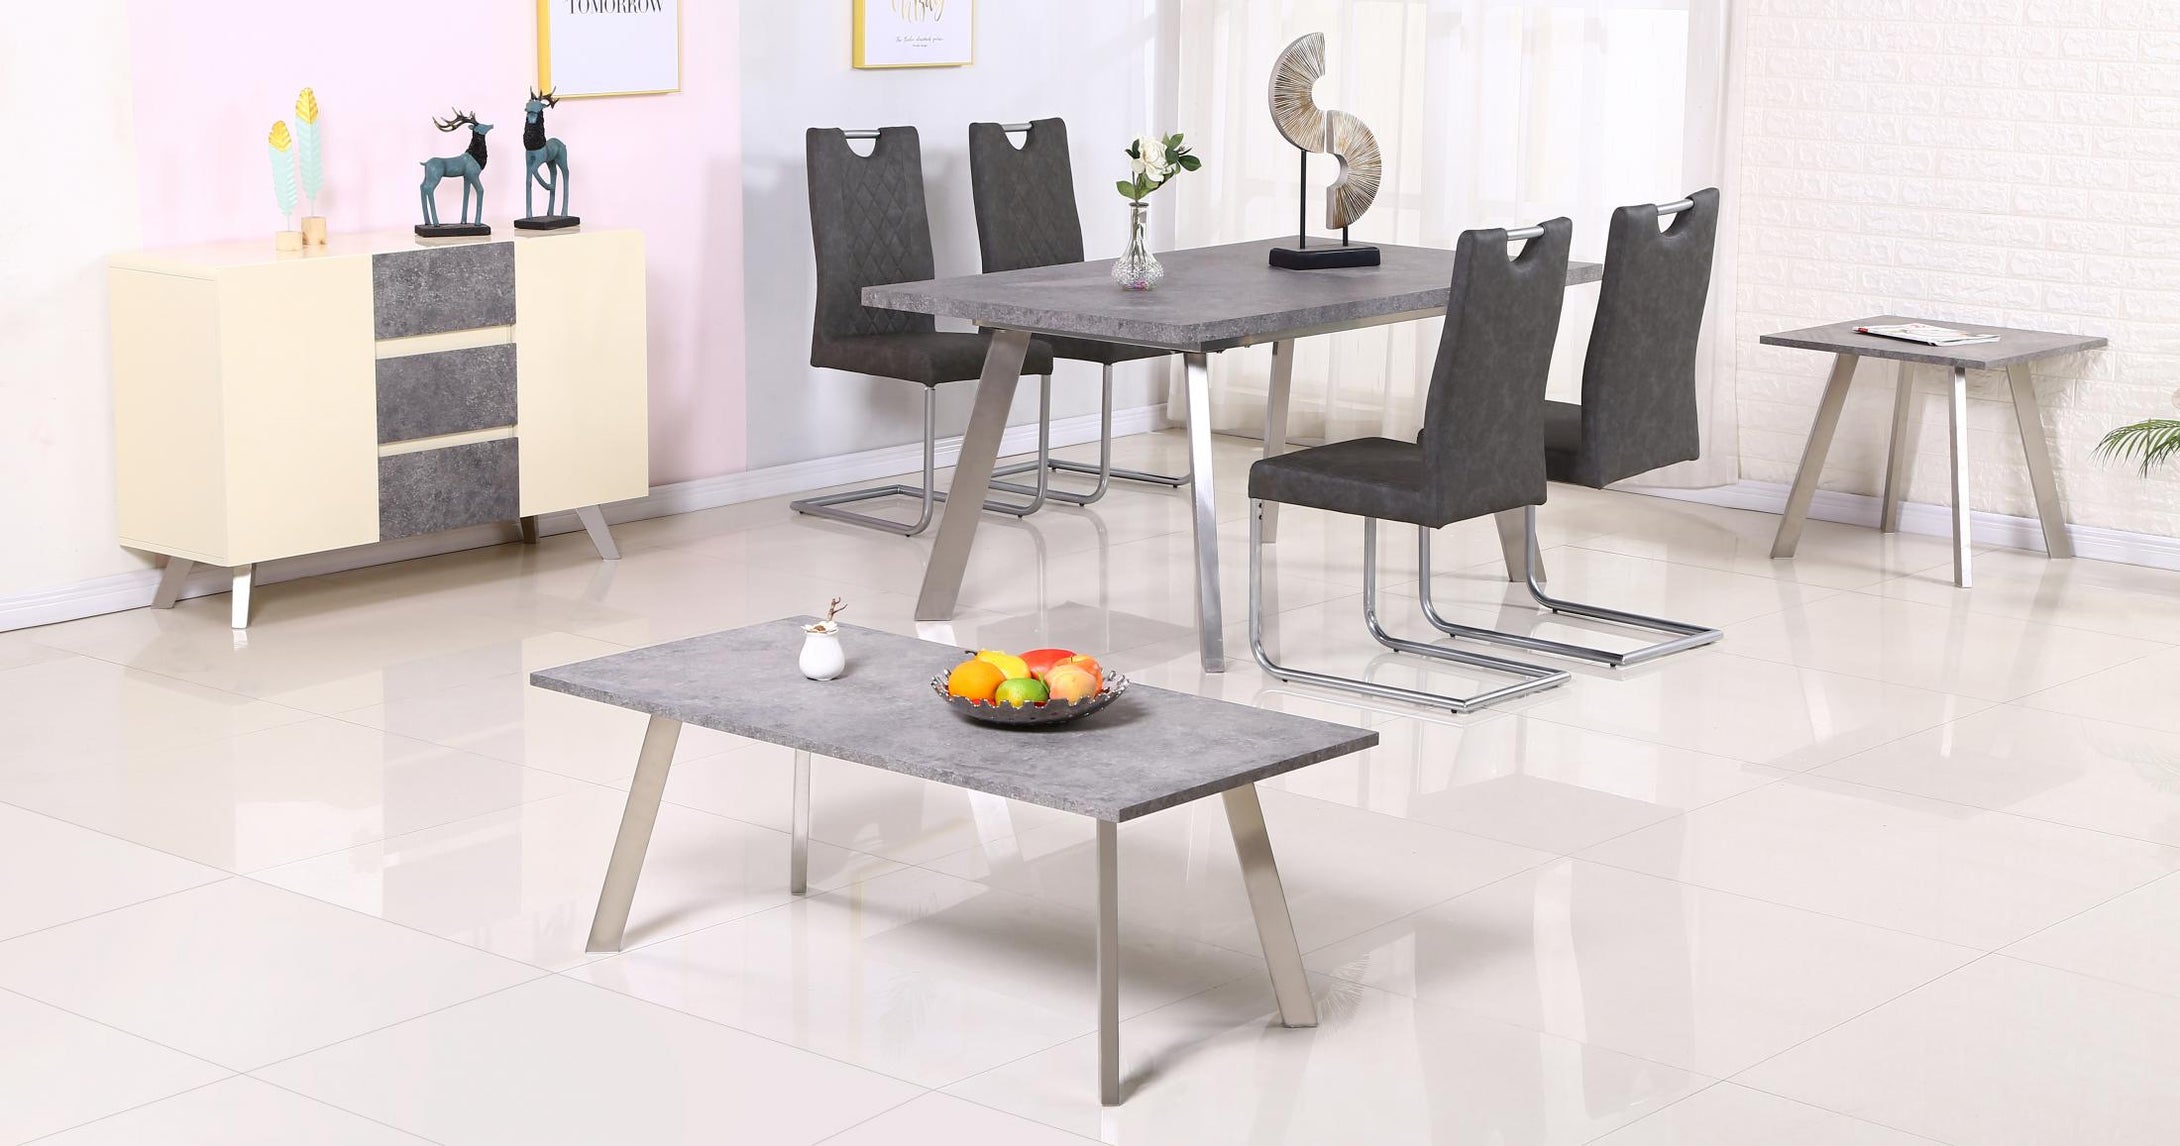 Calipso Special PU Grey Chairs with Brushed Stainless Steel (4s)